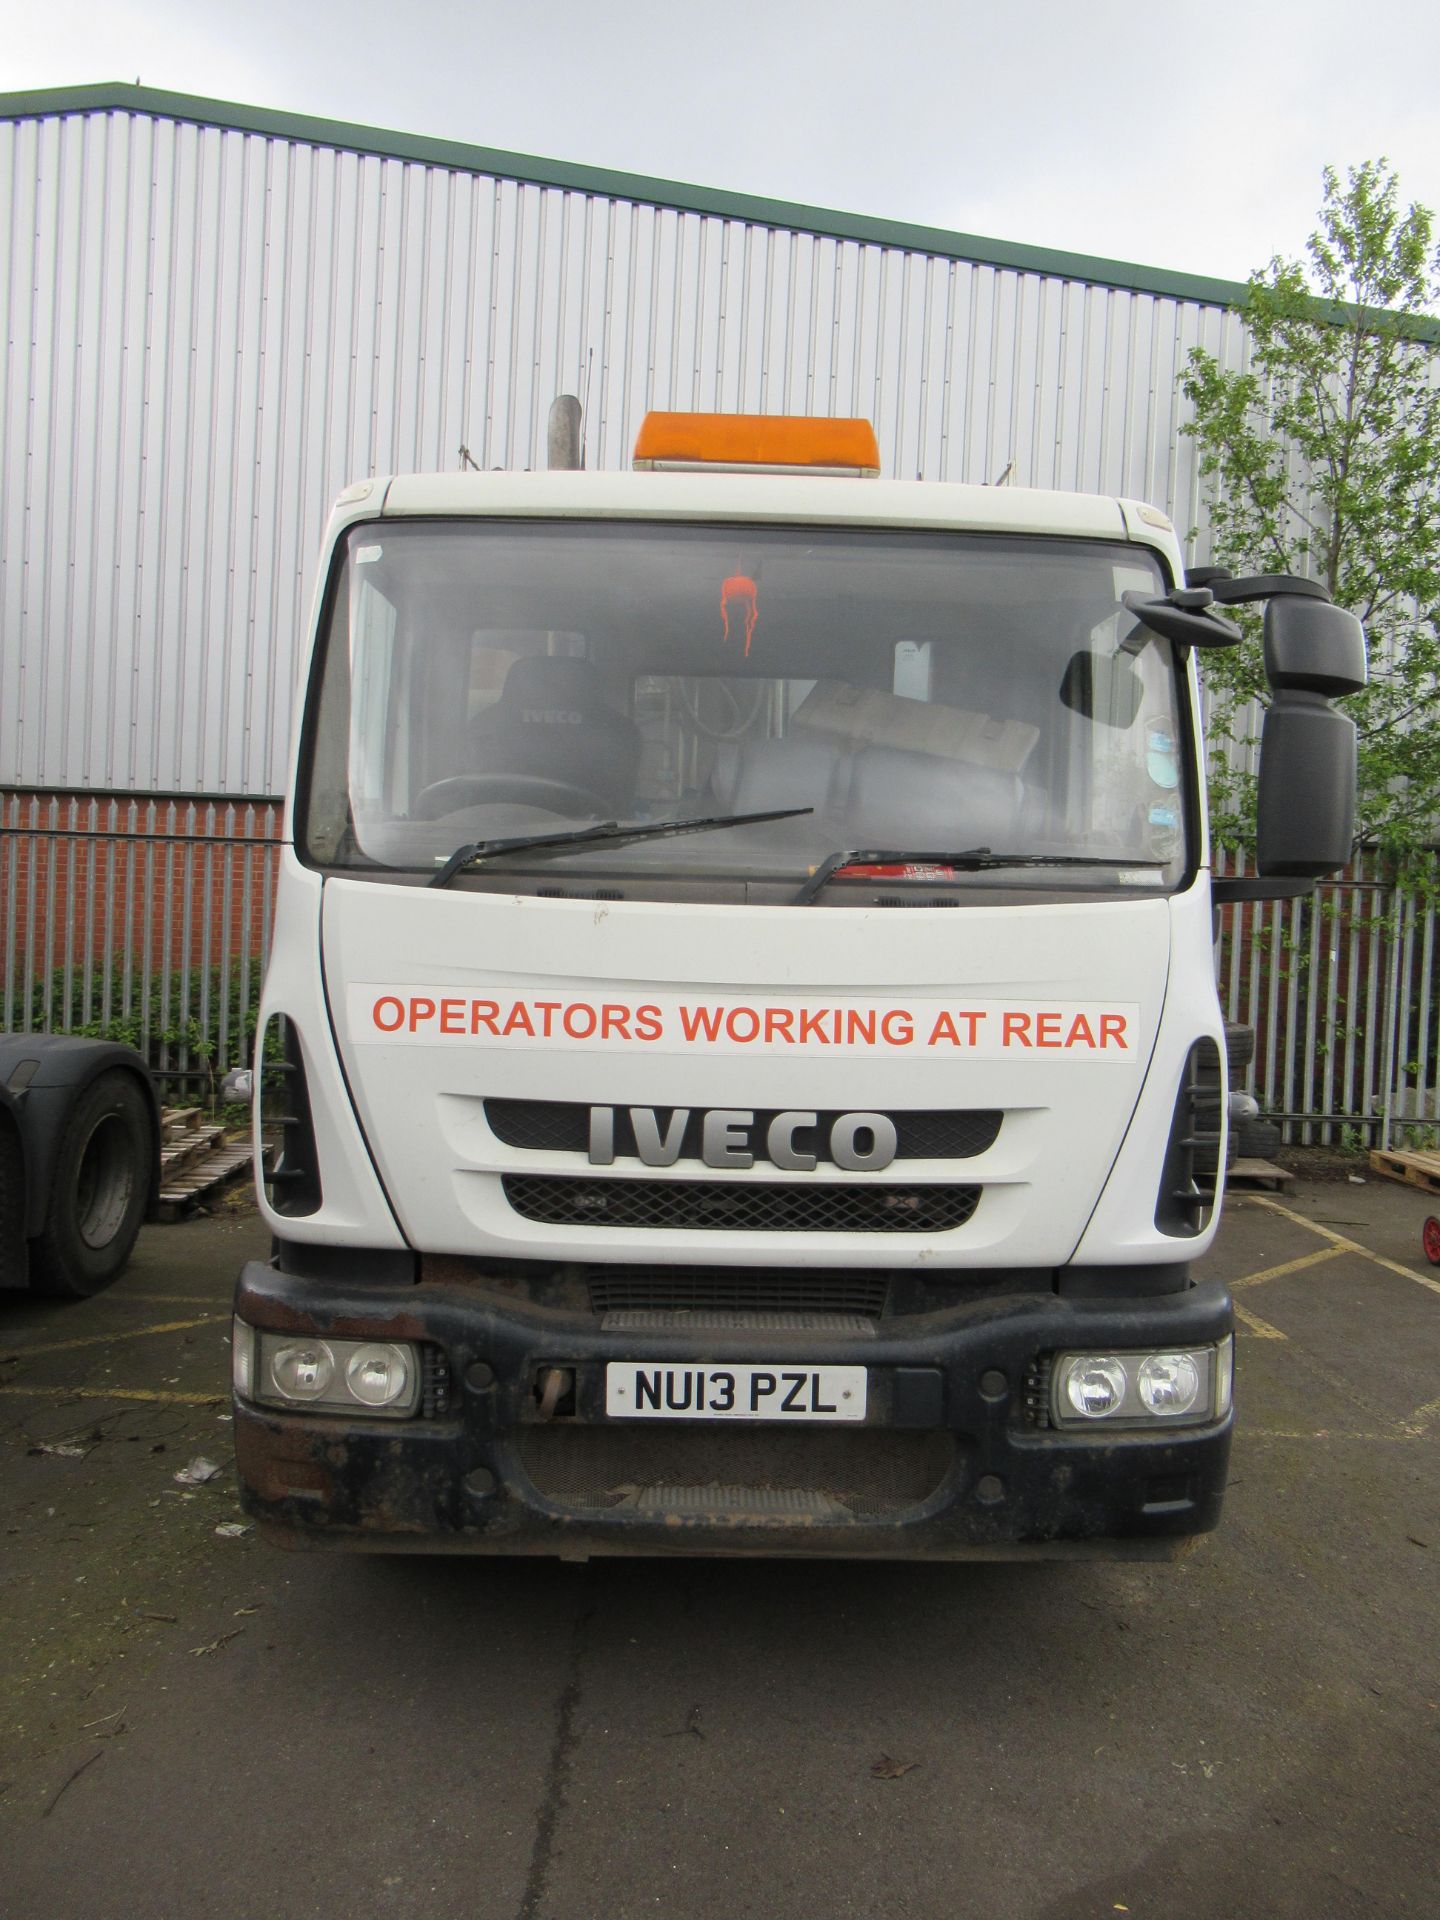 2013 WHITE IVECO EUROCARGO (MY 2008) Refuse Collection Vehicle